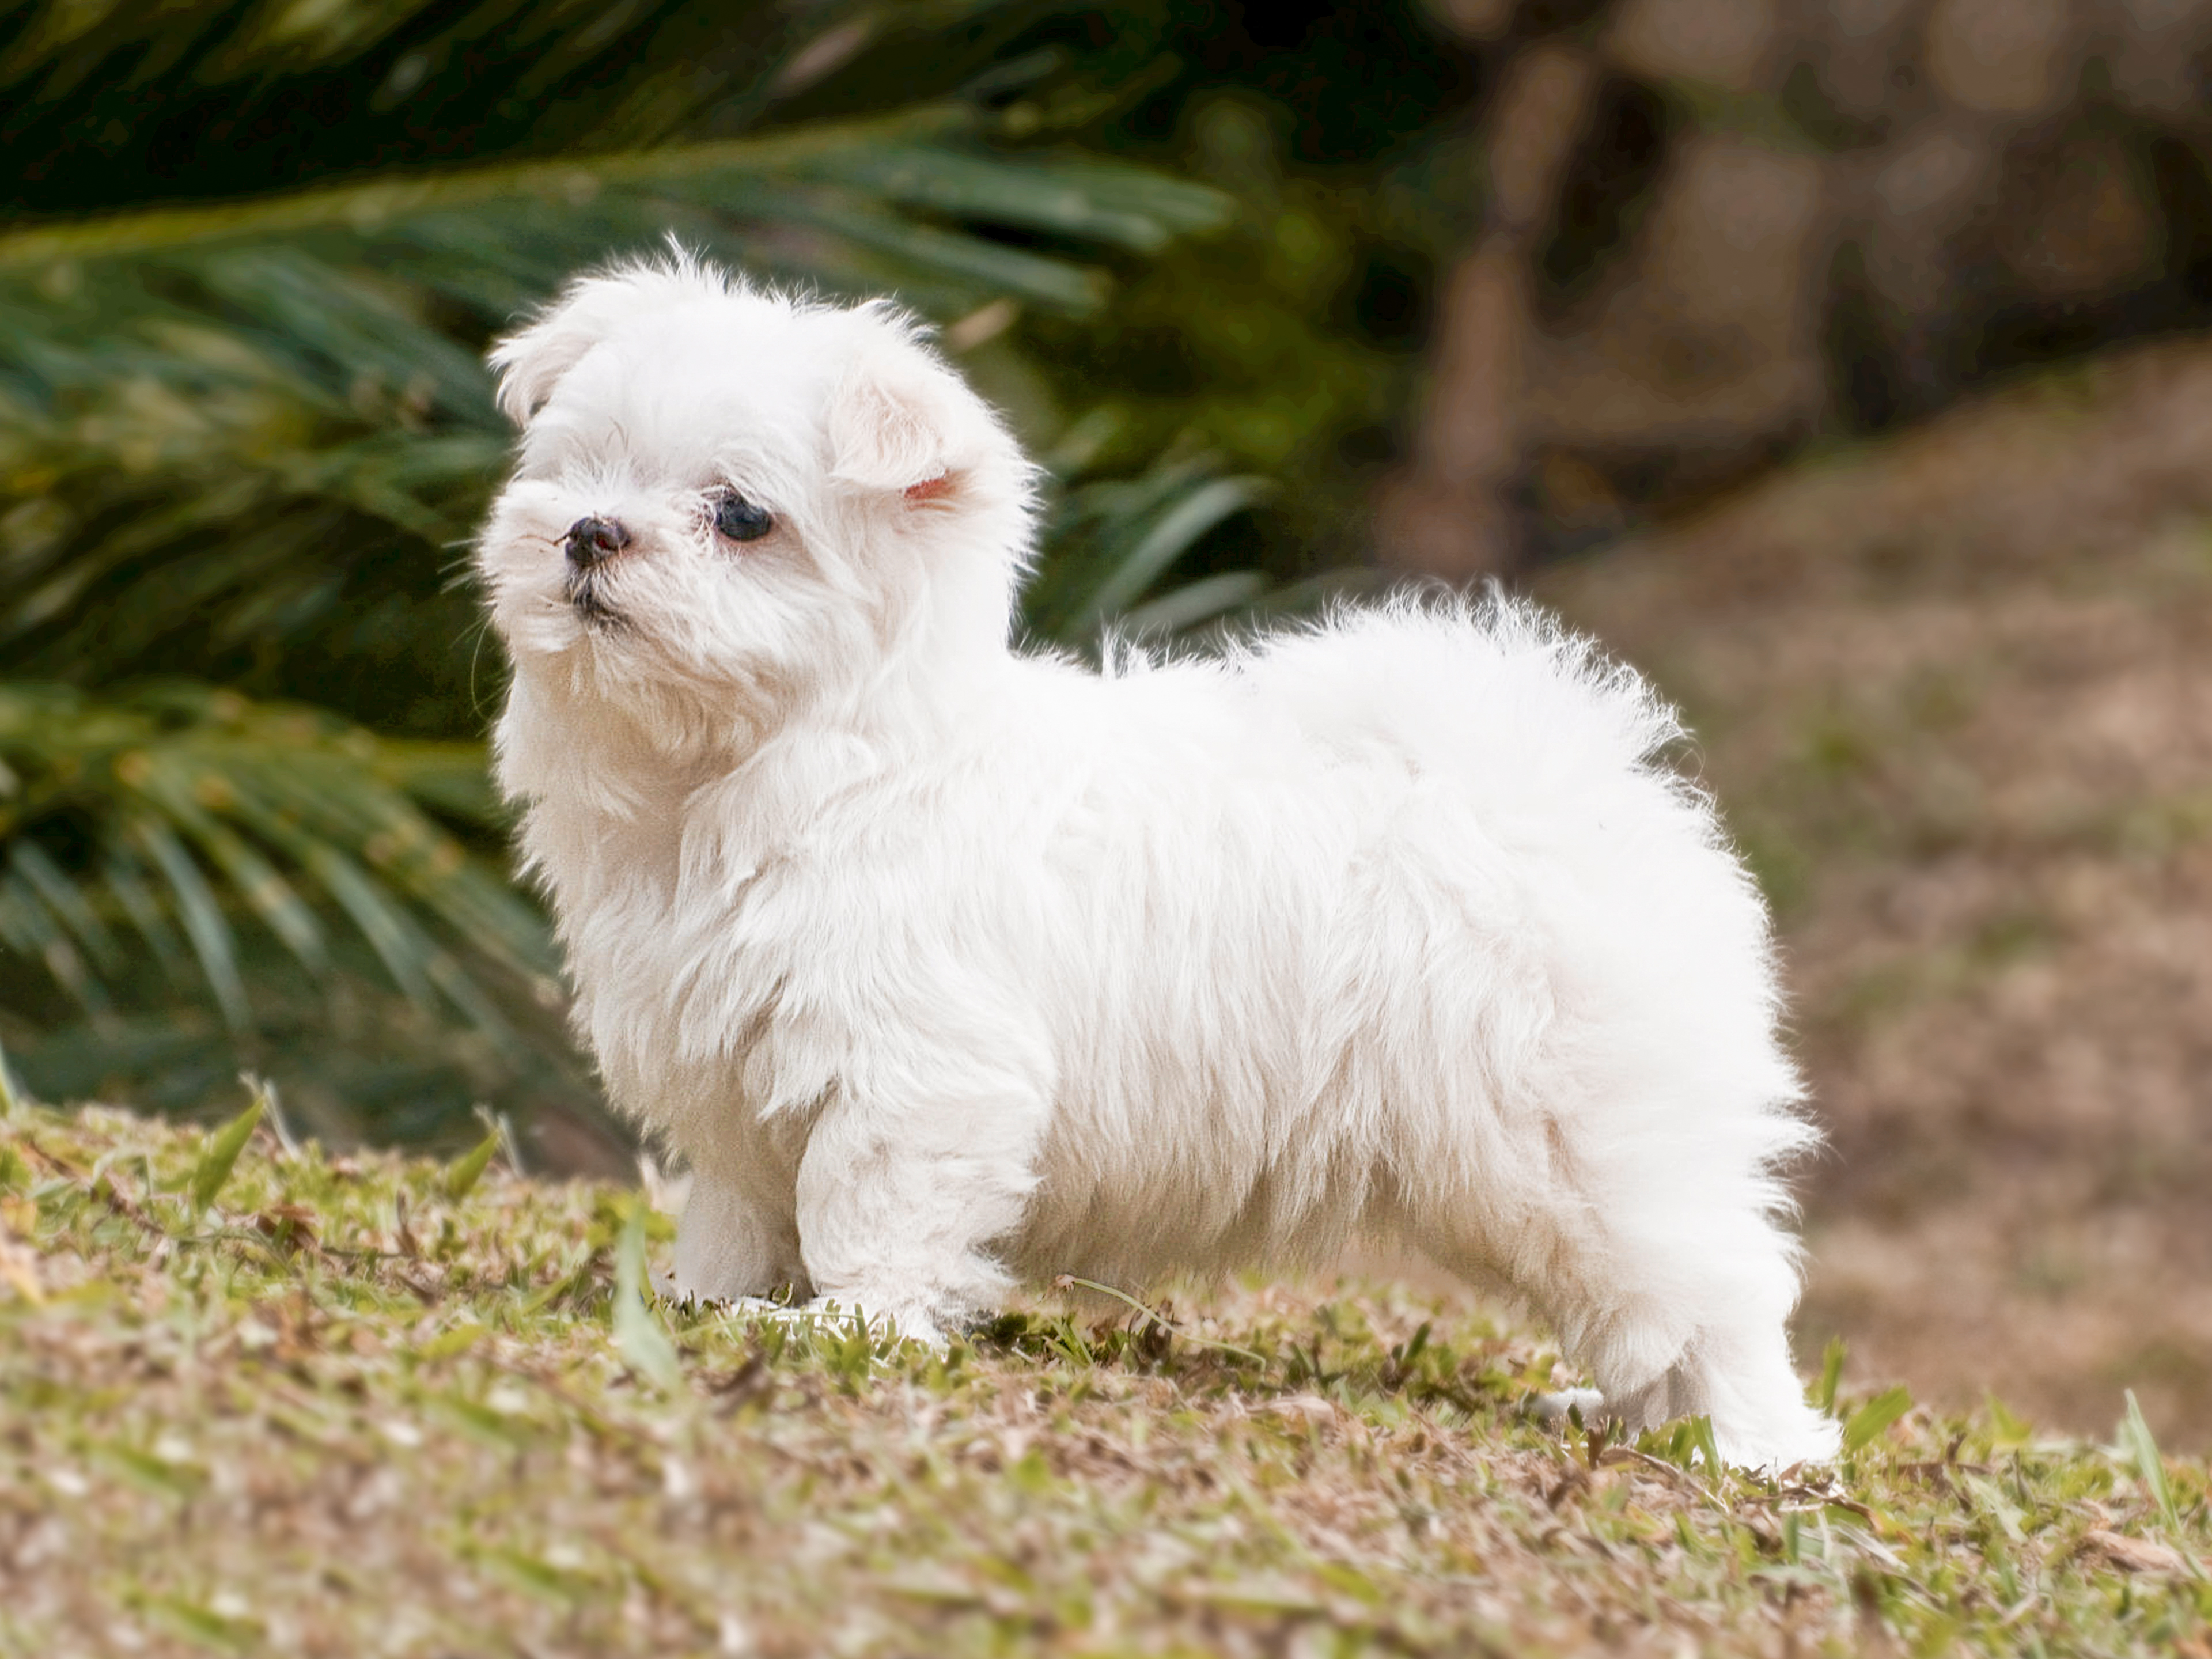 Bichon Frise puppy standing outdoors in grass